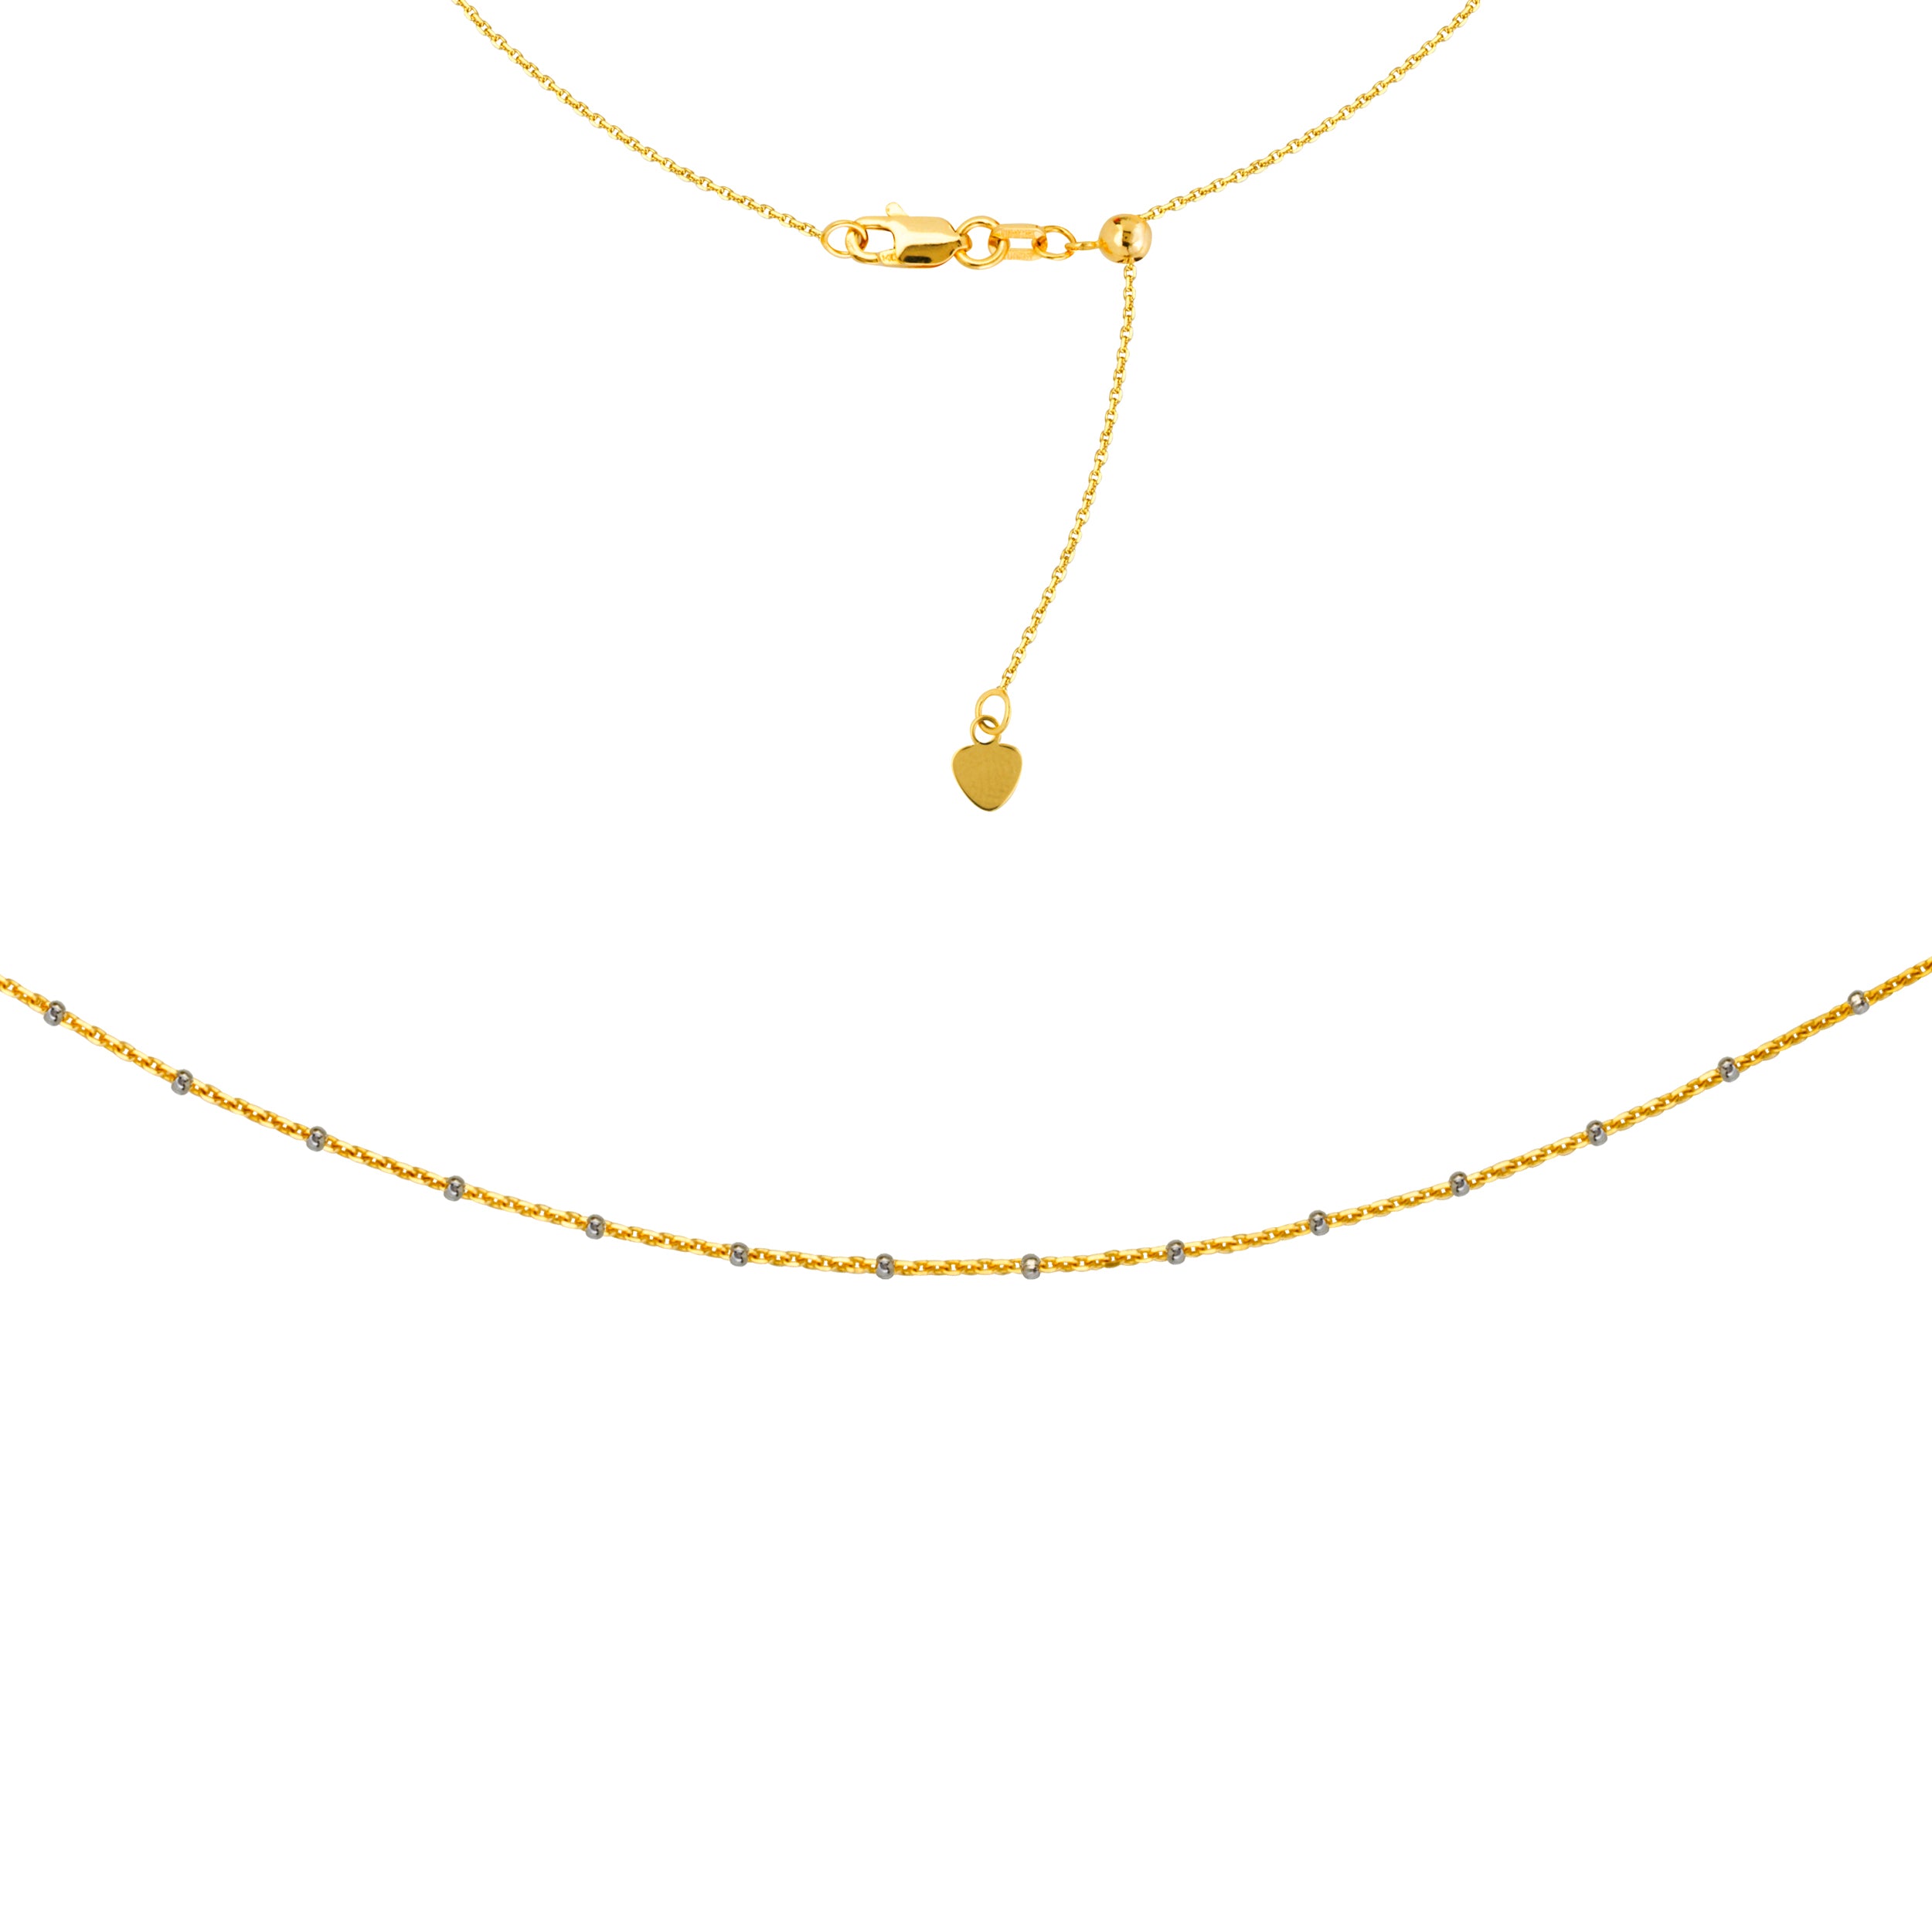 Two Tone Saturn Chain Choker 14k Yellow Gold Necklace, 16" Adjustable